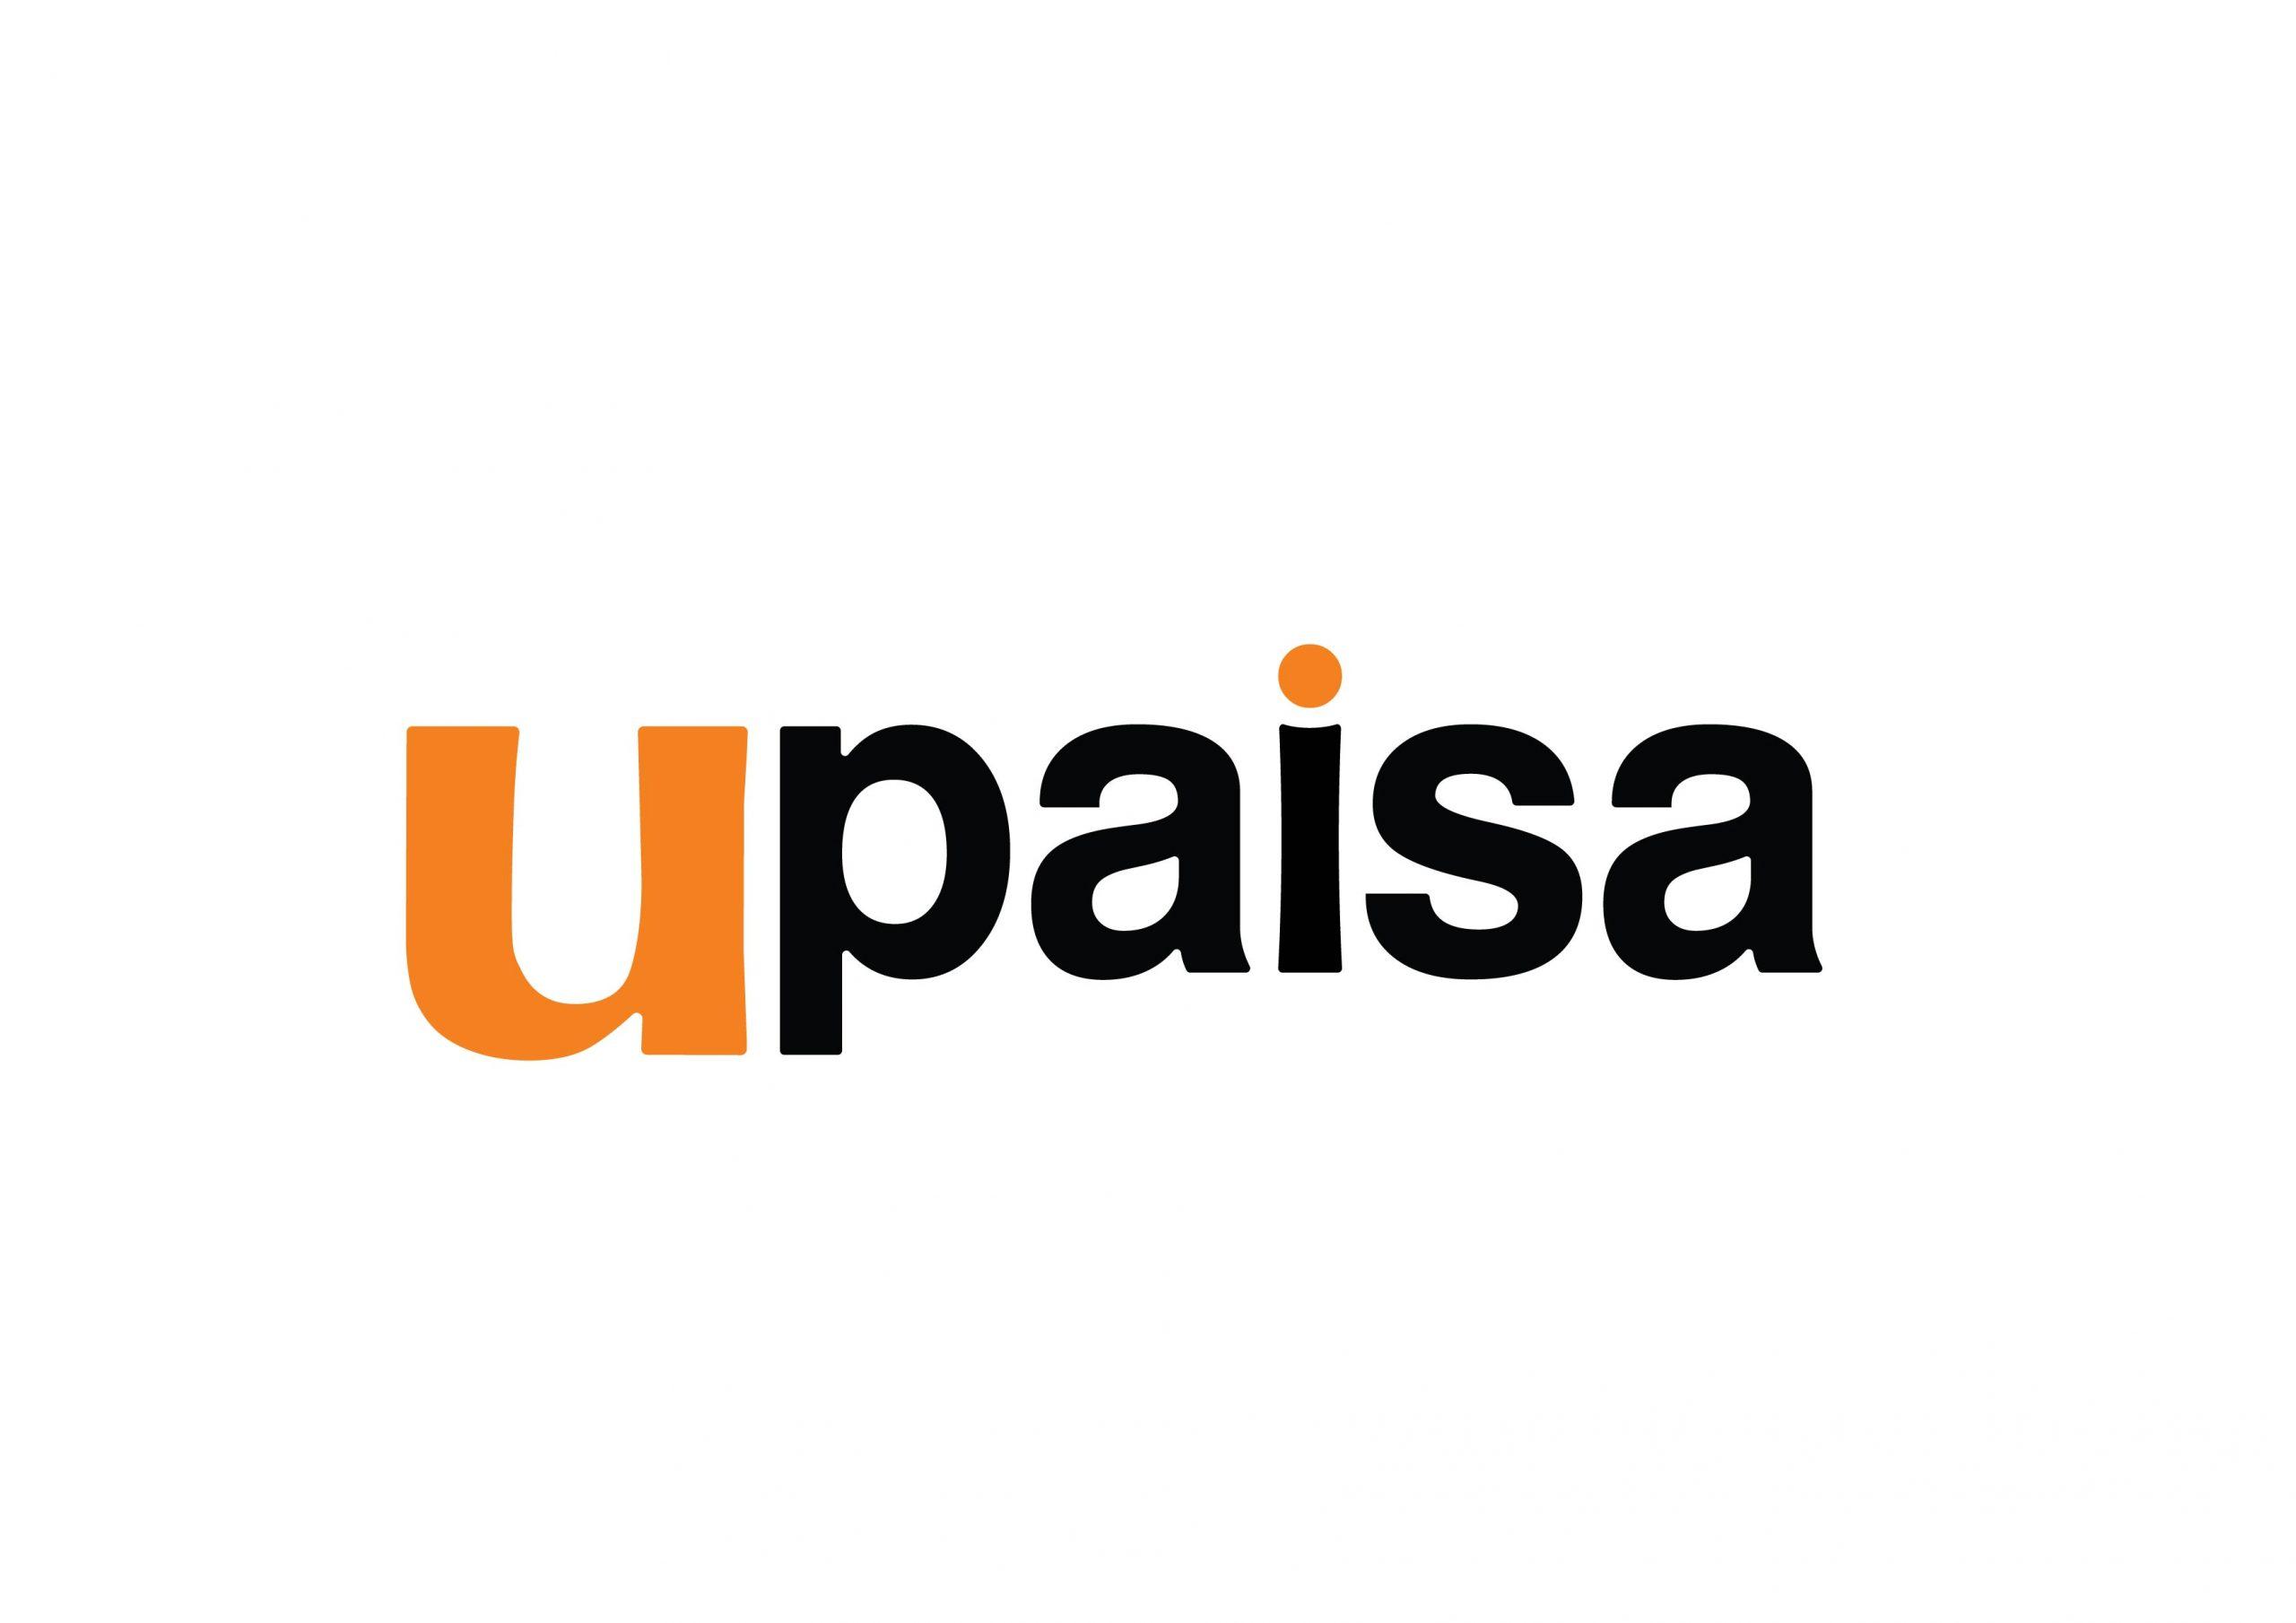 UPaisa introduces government payments; Token Tax, Traffic Challan made simple through its state of the art services